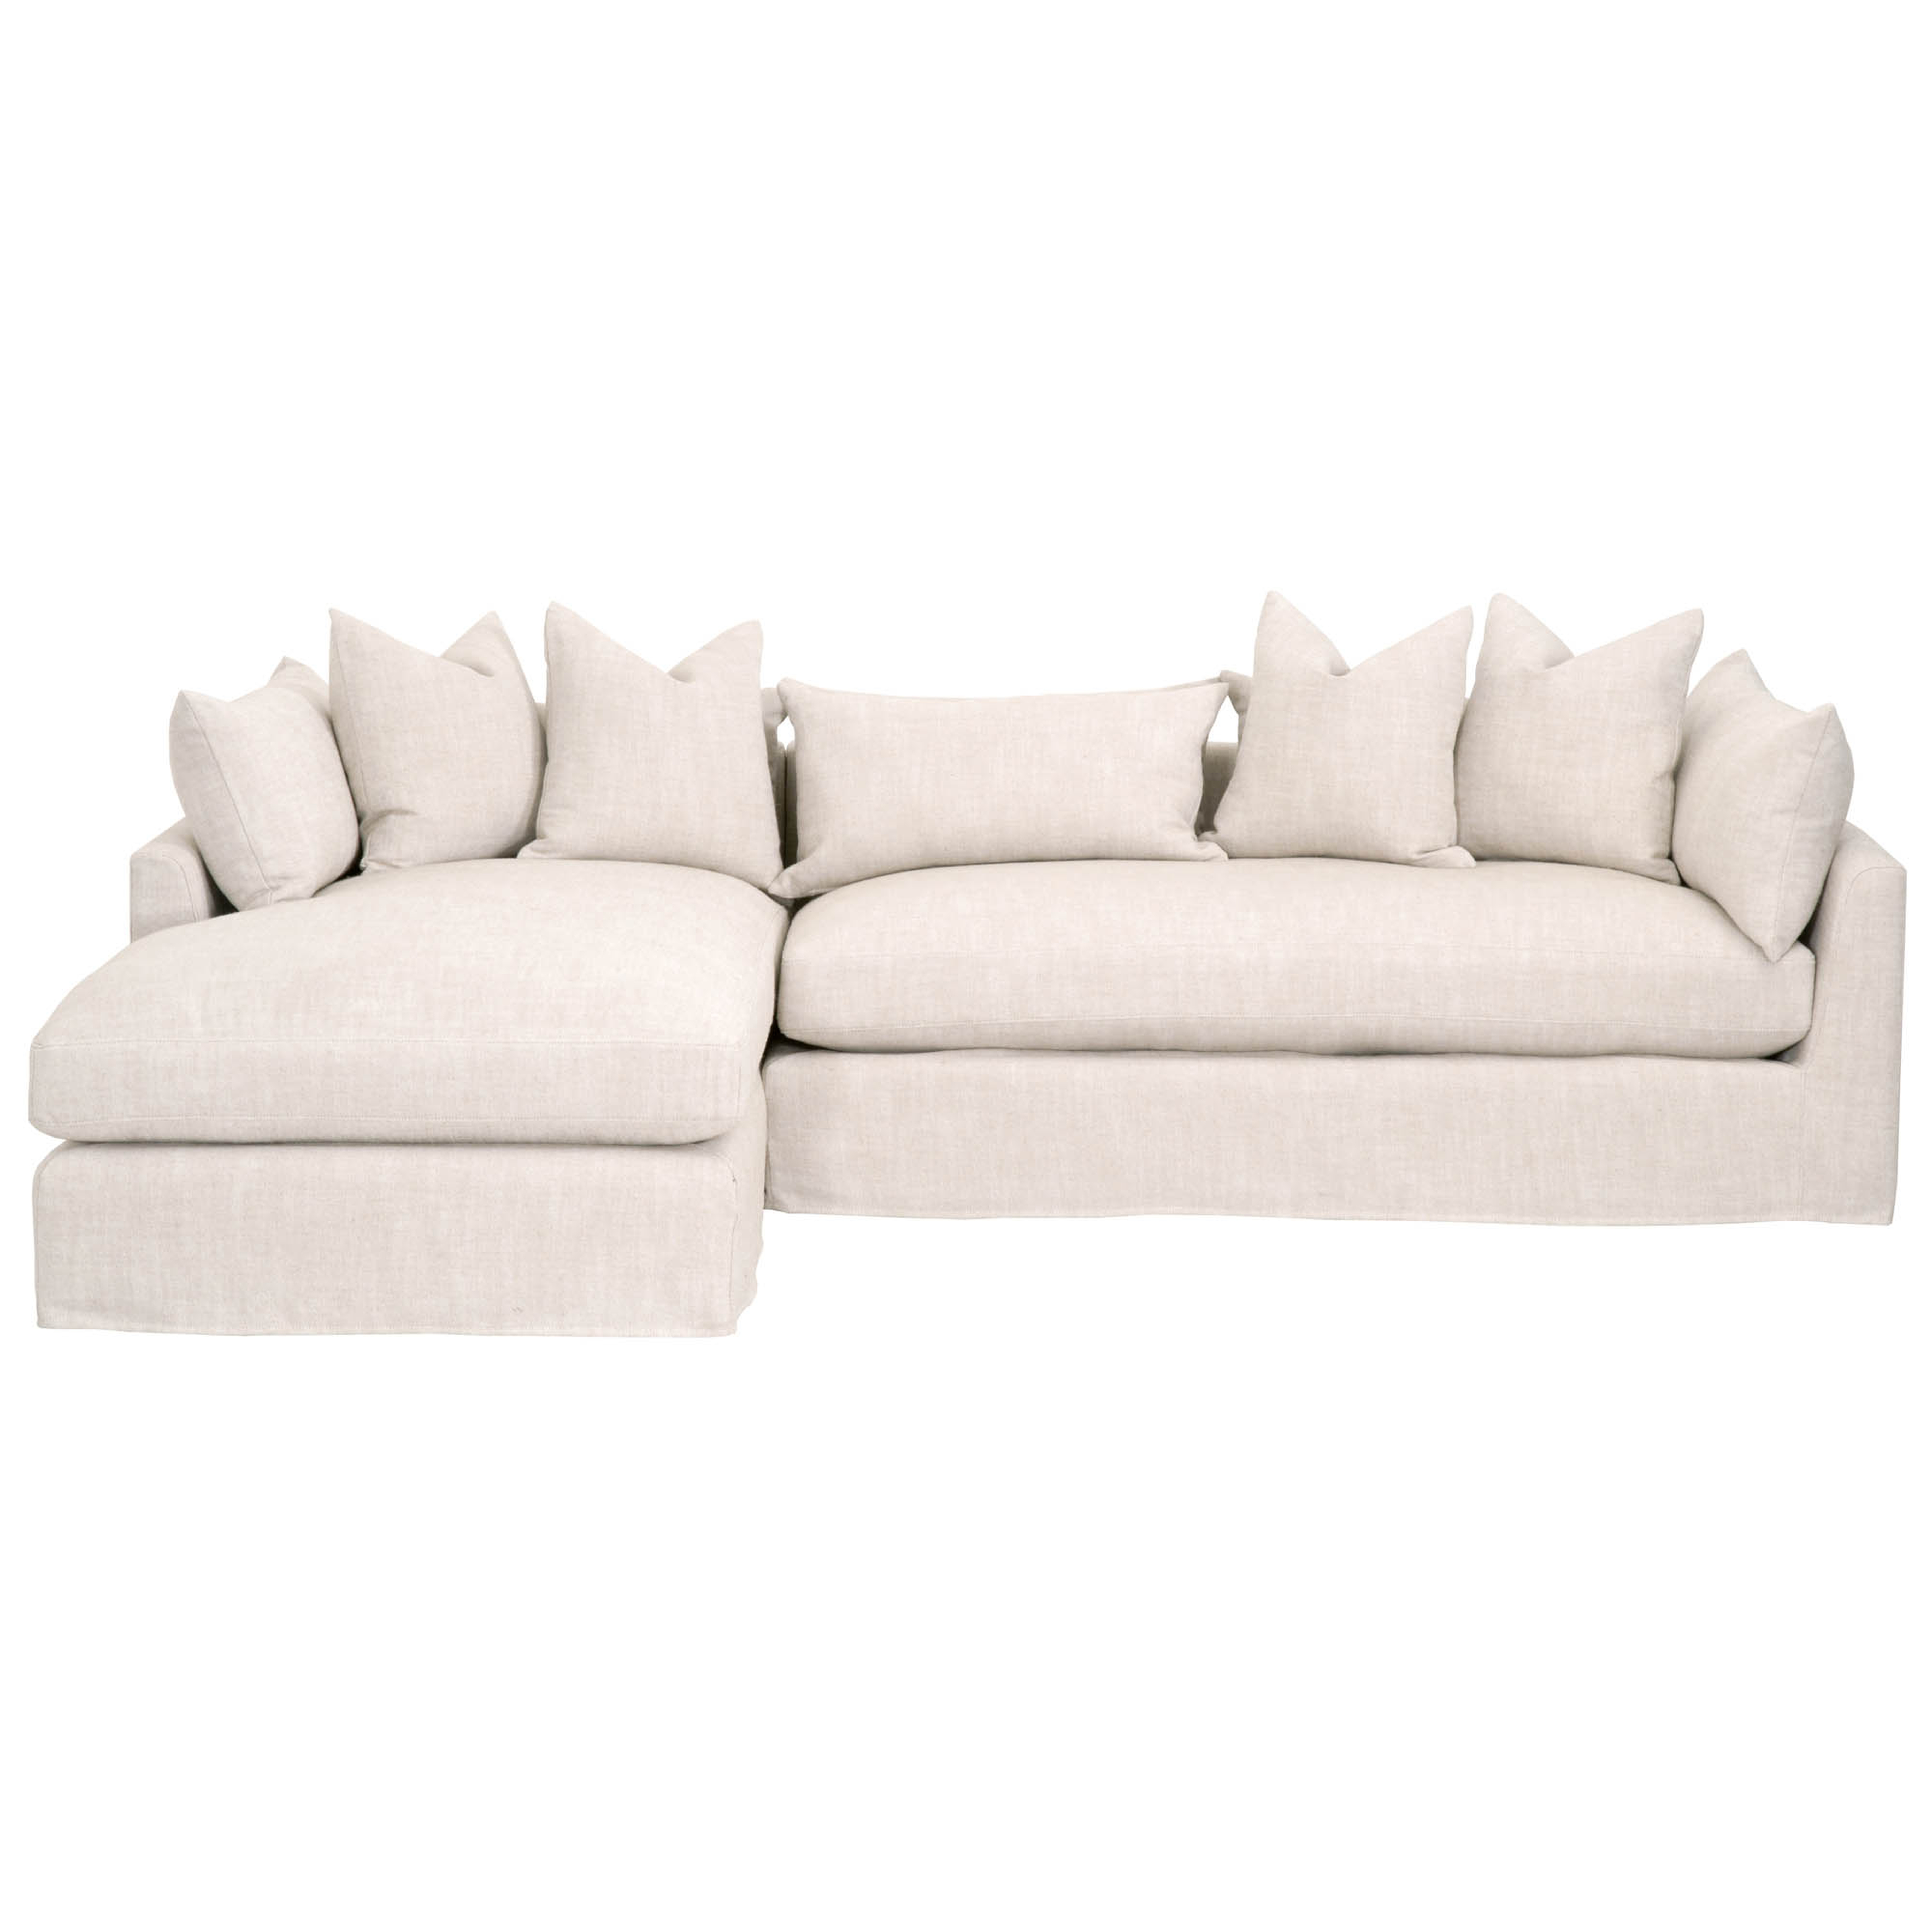 Ridley 110" Left Facing Lounge Slipcover Sectional, Bisque, Espresso - Cove Goods